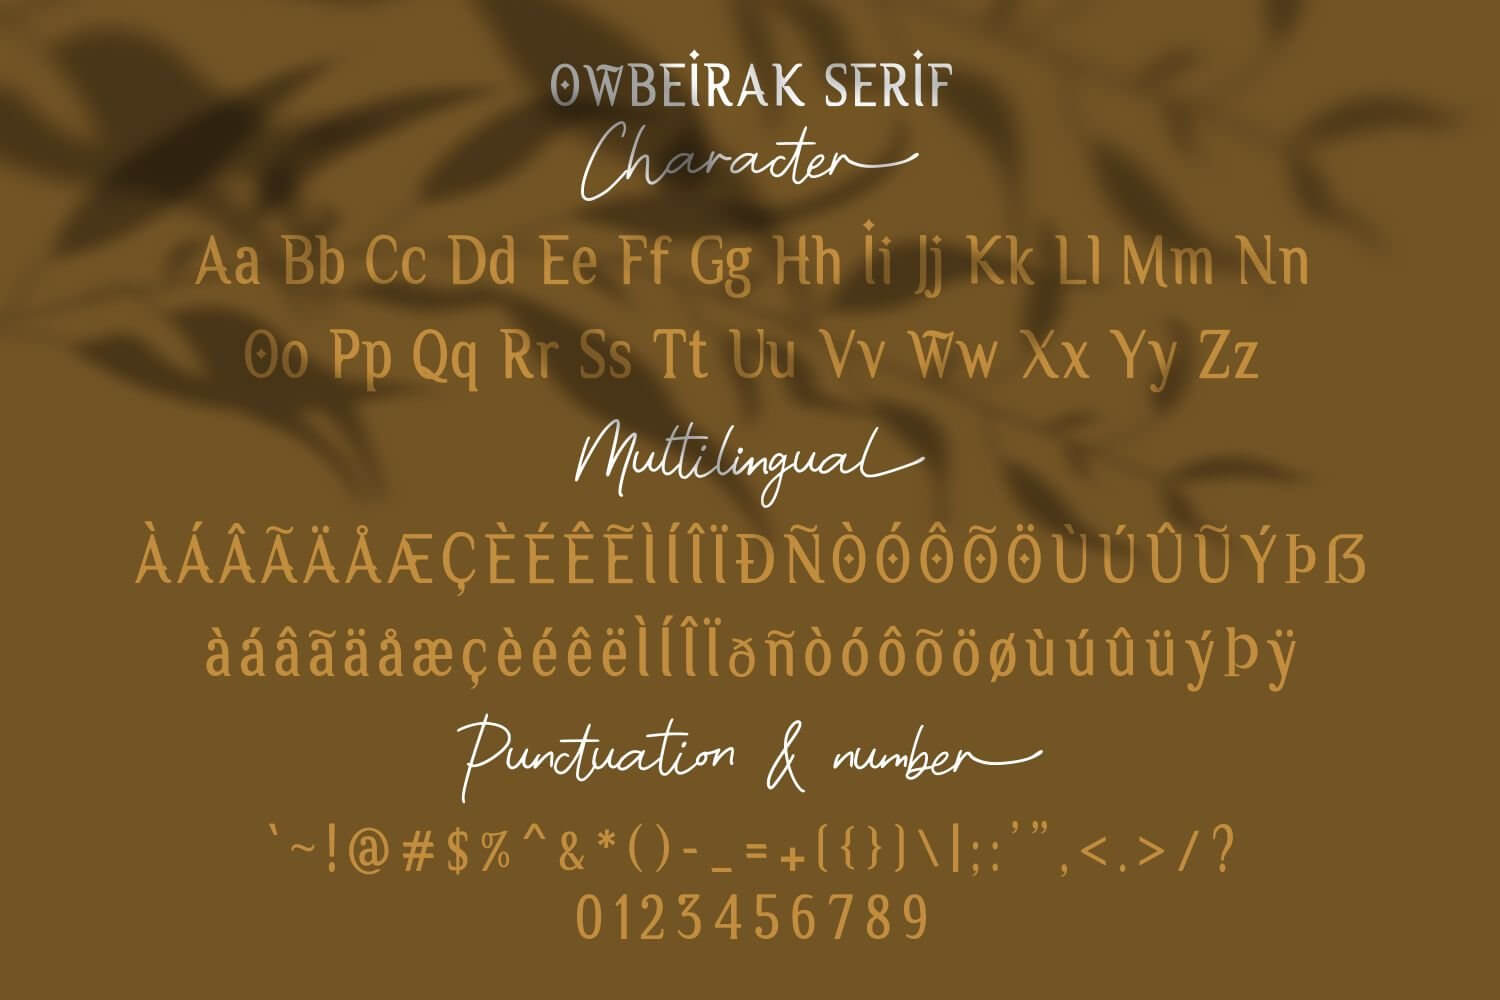 owbeirak duo serif and script collection font all multilingual symbols example.